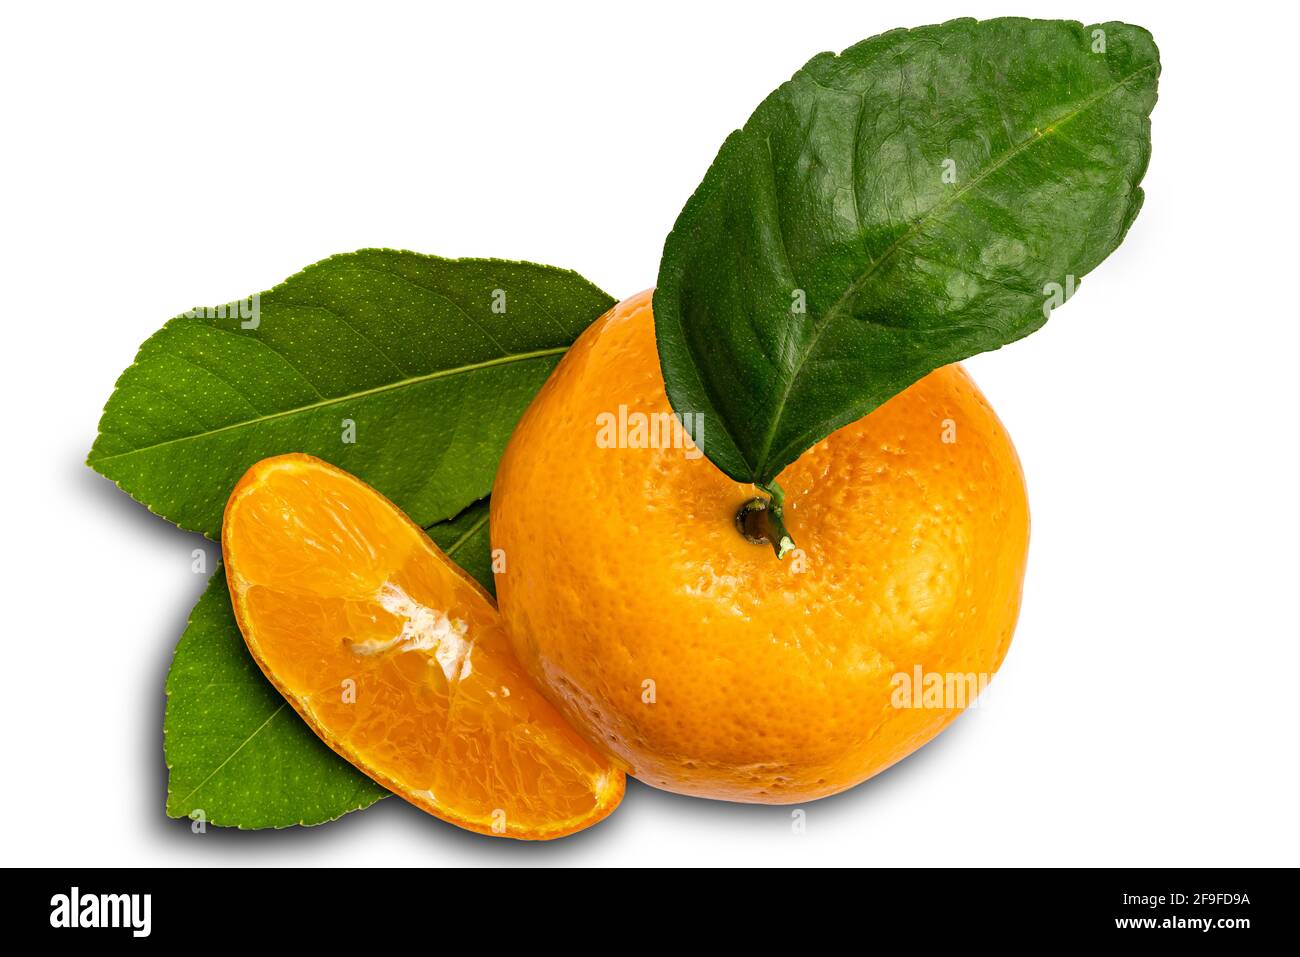 Top view of mandarin orange or Citrus reticulata with leaves on white background with clipping path Stock Photo